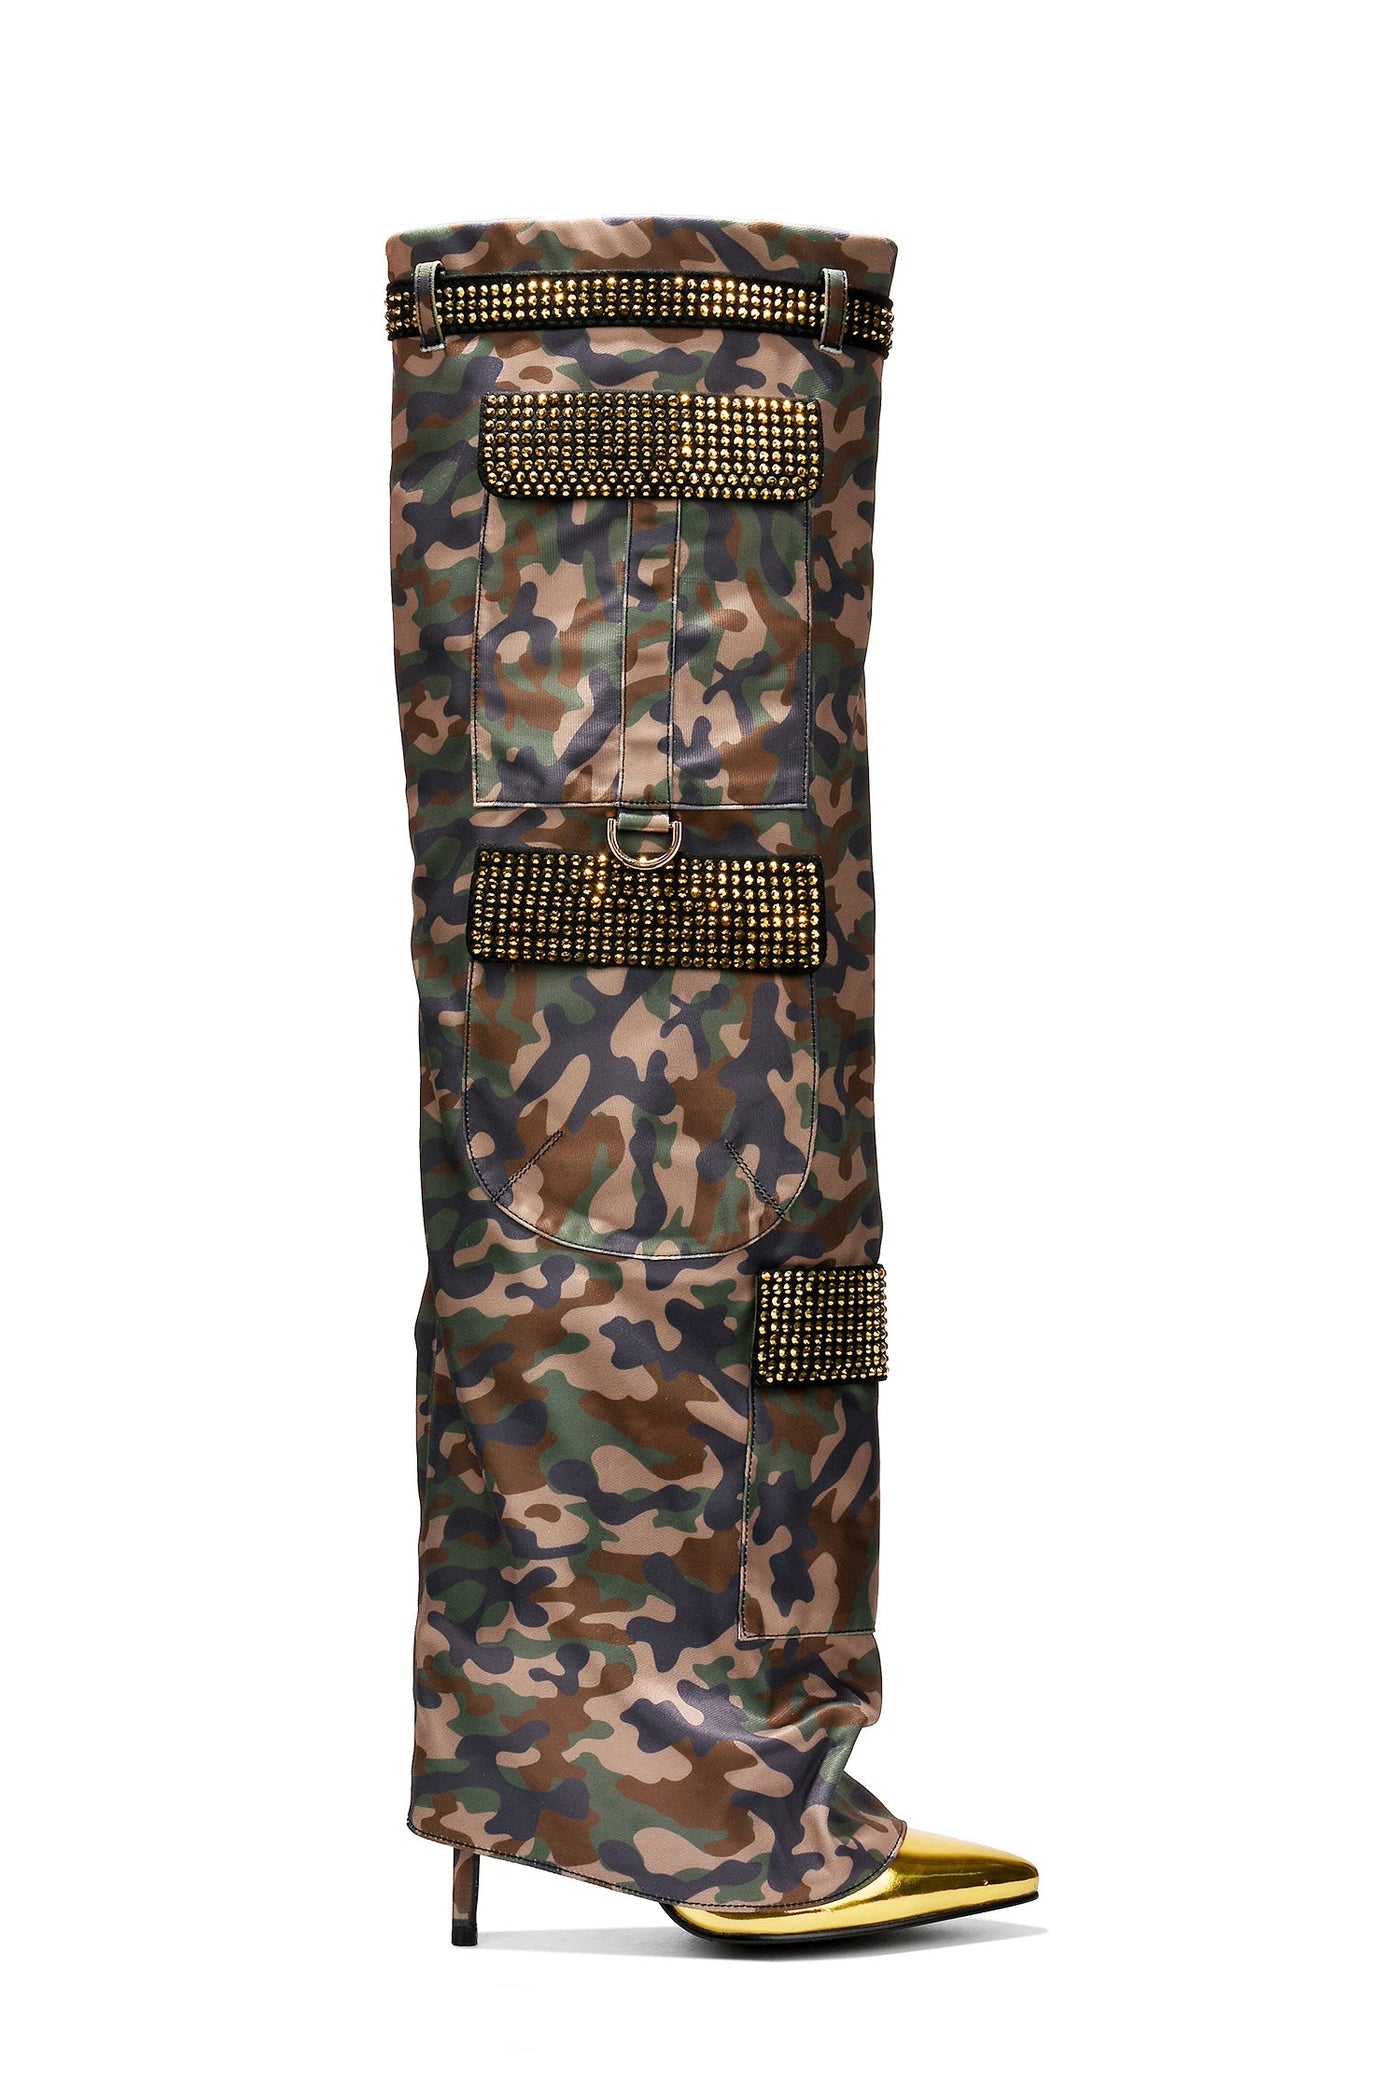 BUNNO - CAMOUFLAGE Thigh High Boots - AMIClubwear